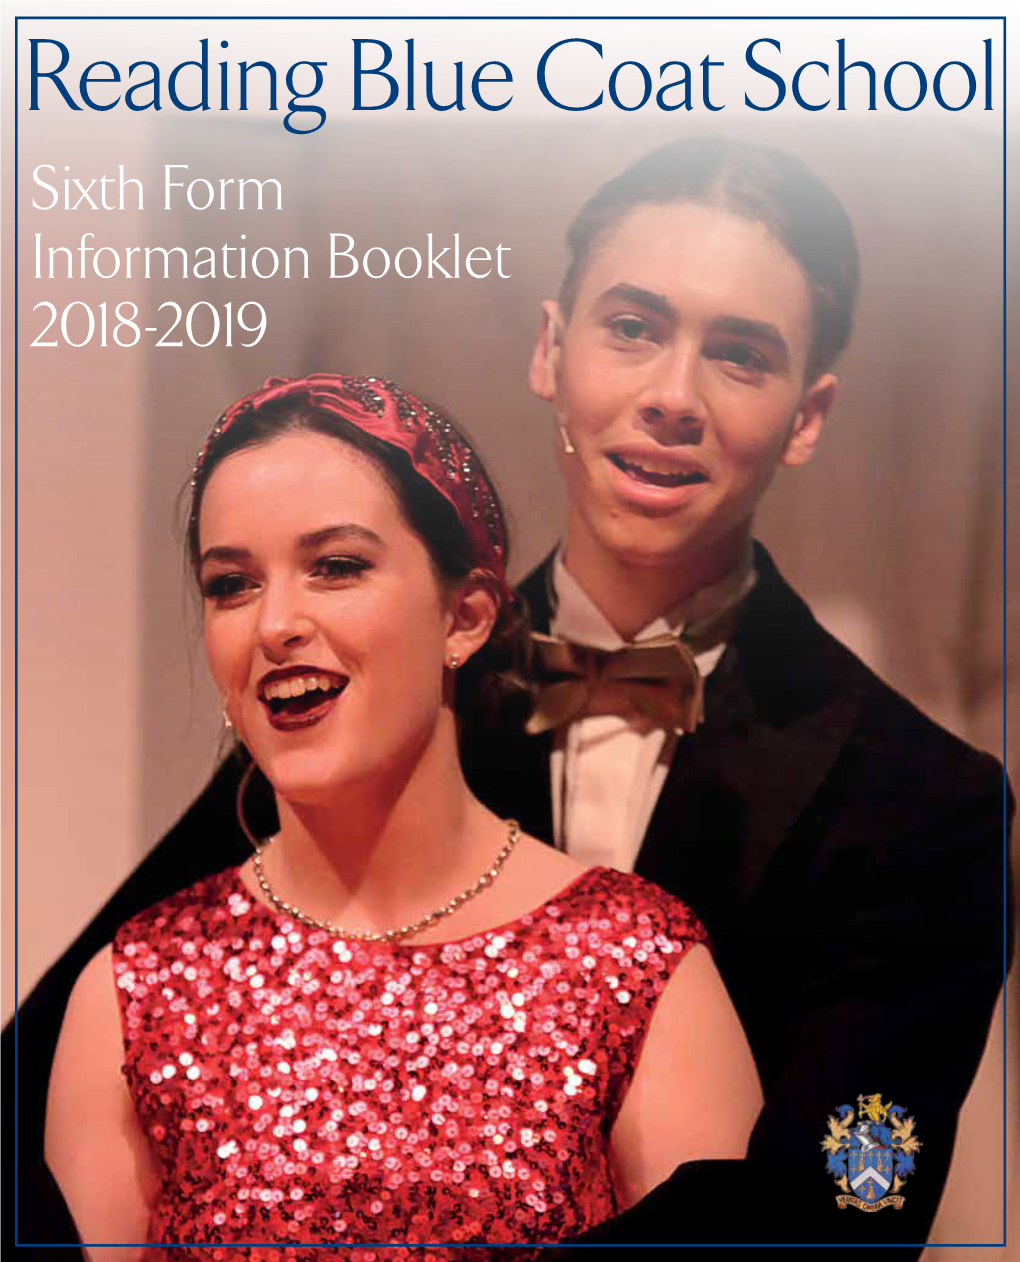 Sixth Form Information Booklet 2018-19